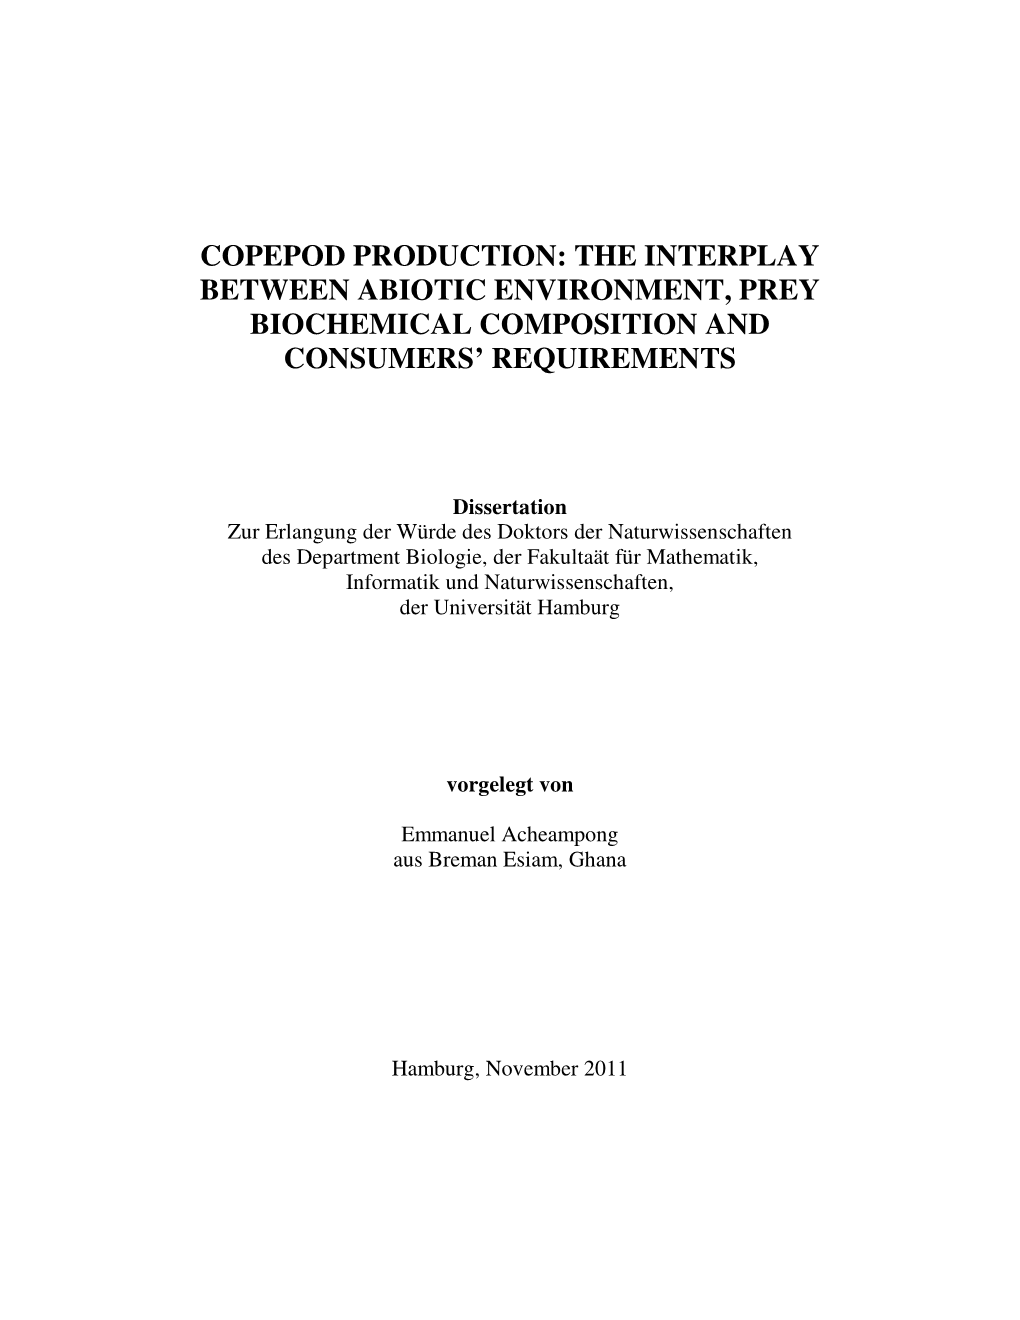 Copepod Production: the Interplay Between Abiotic Environment, Prey Biochemical Composition and Consumers’ Requirements